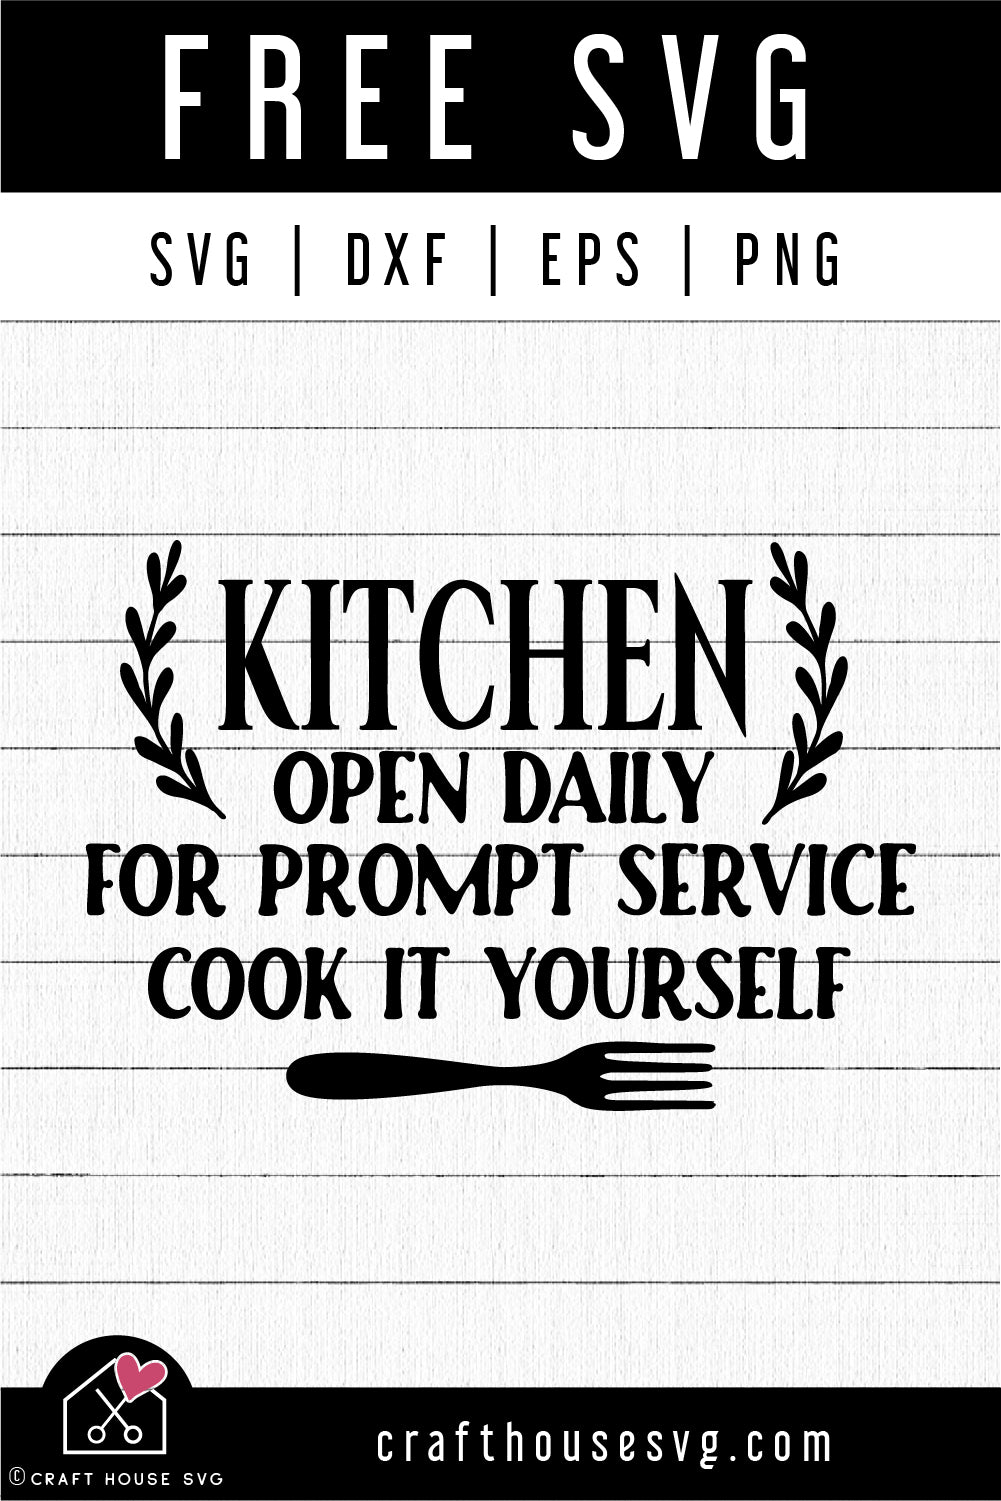 FREE Kitchen Open Daily SVG Funny Sign Cut File - Craft House SVG